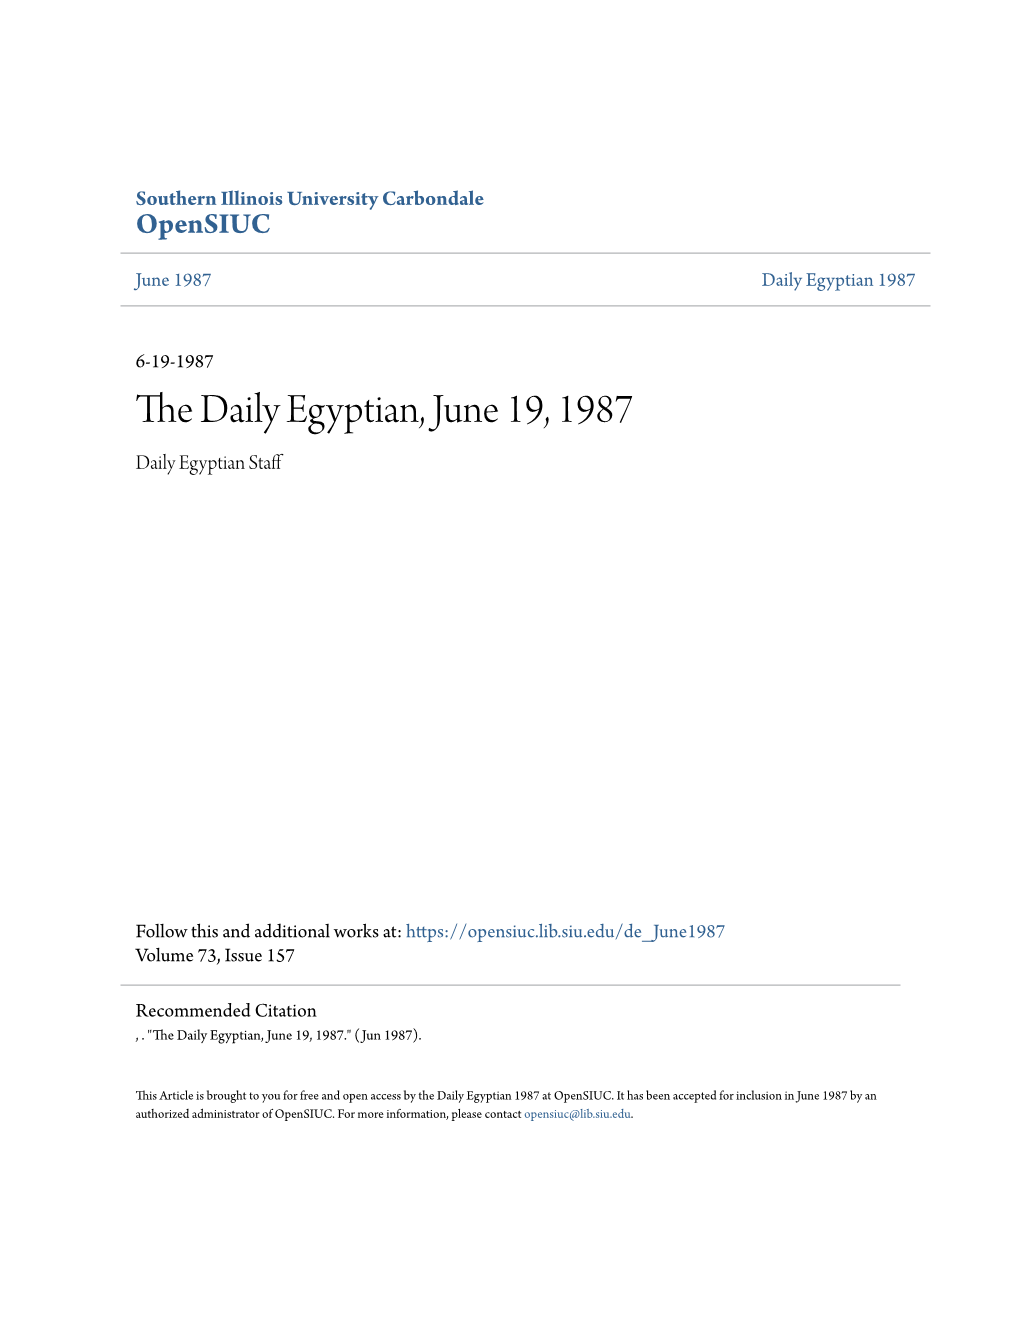 The Daily Egyptian, June 19, 1987